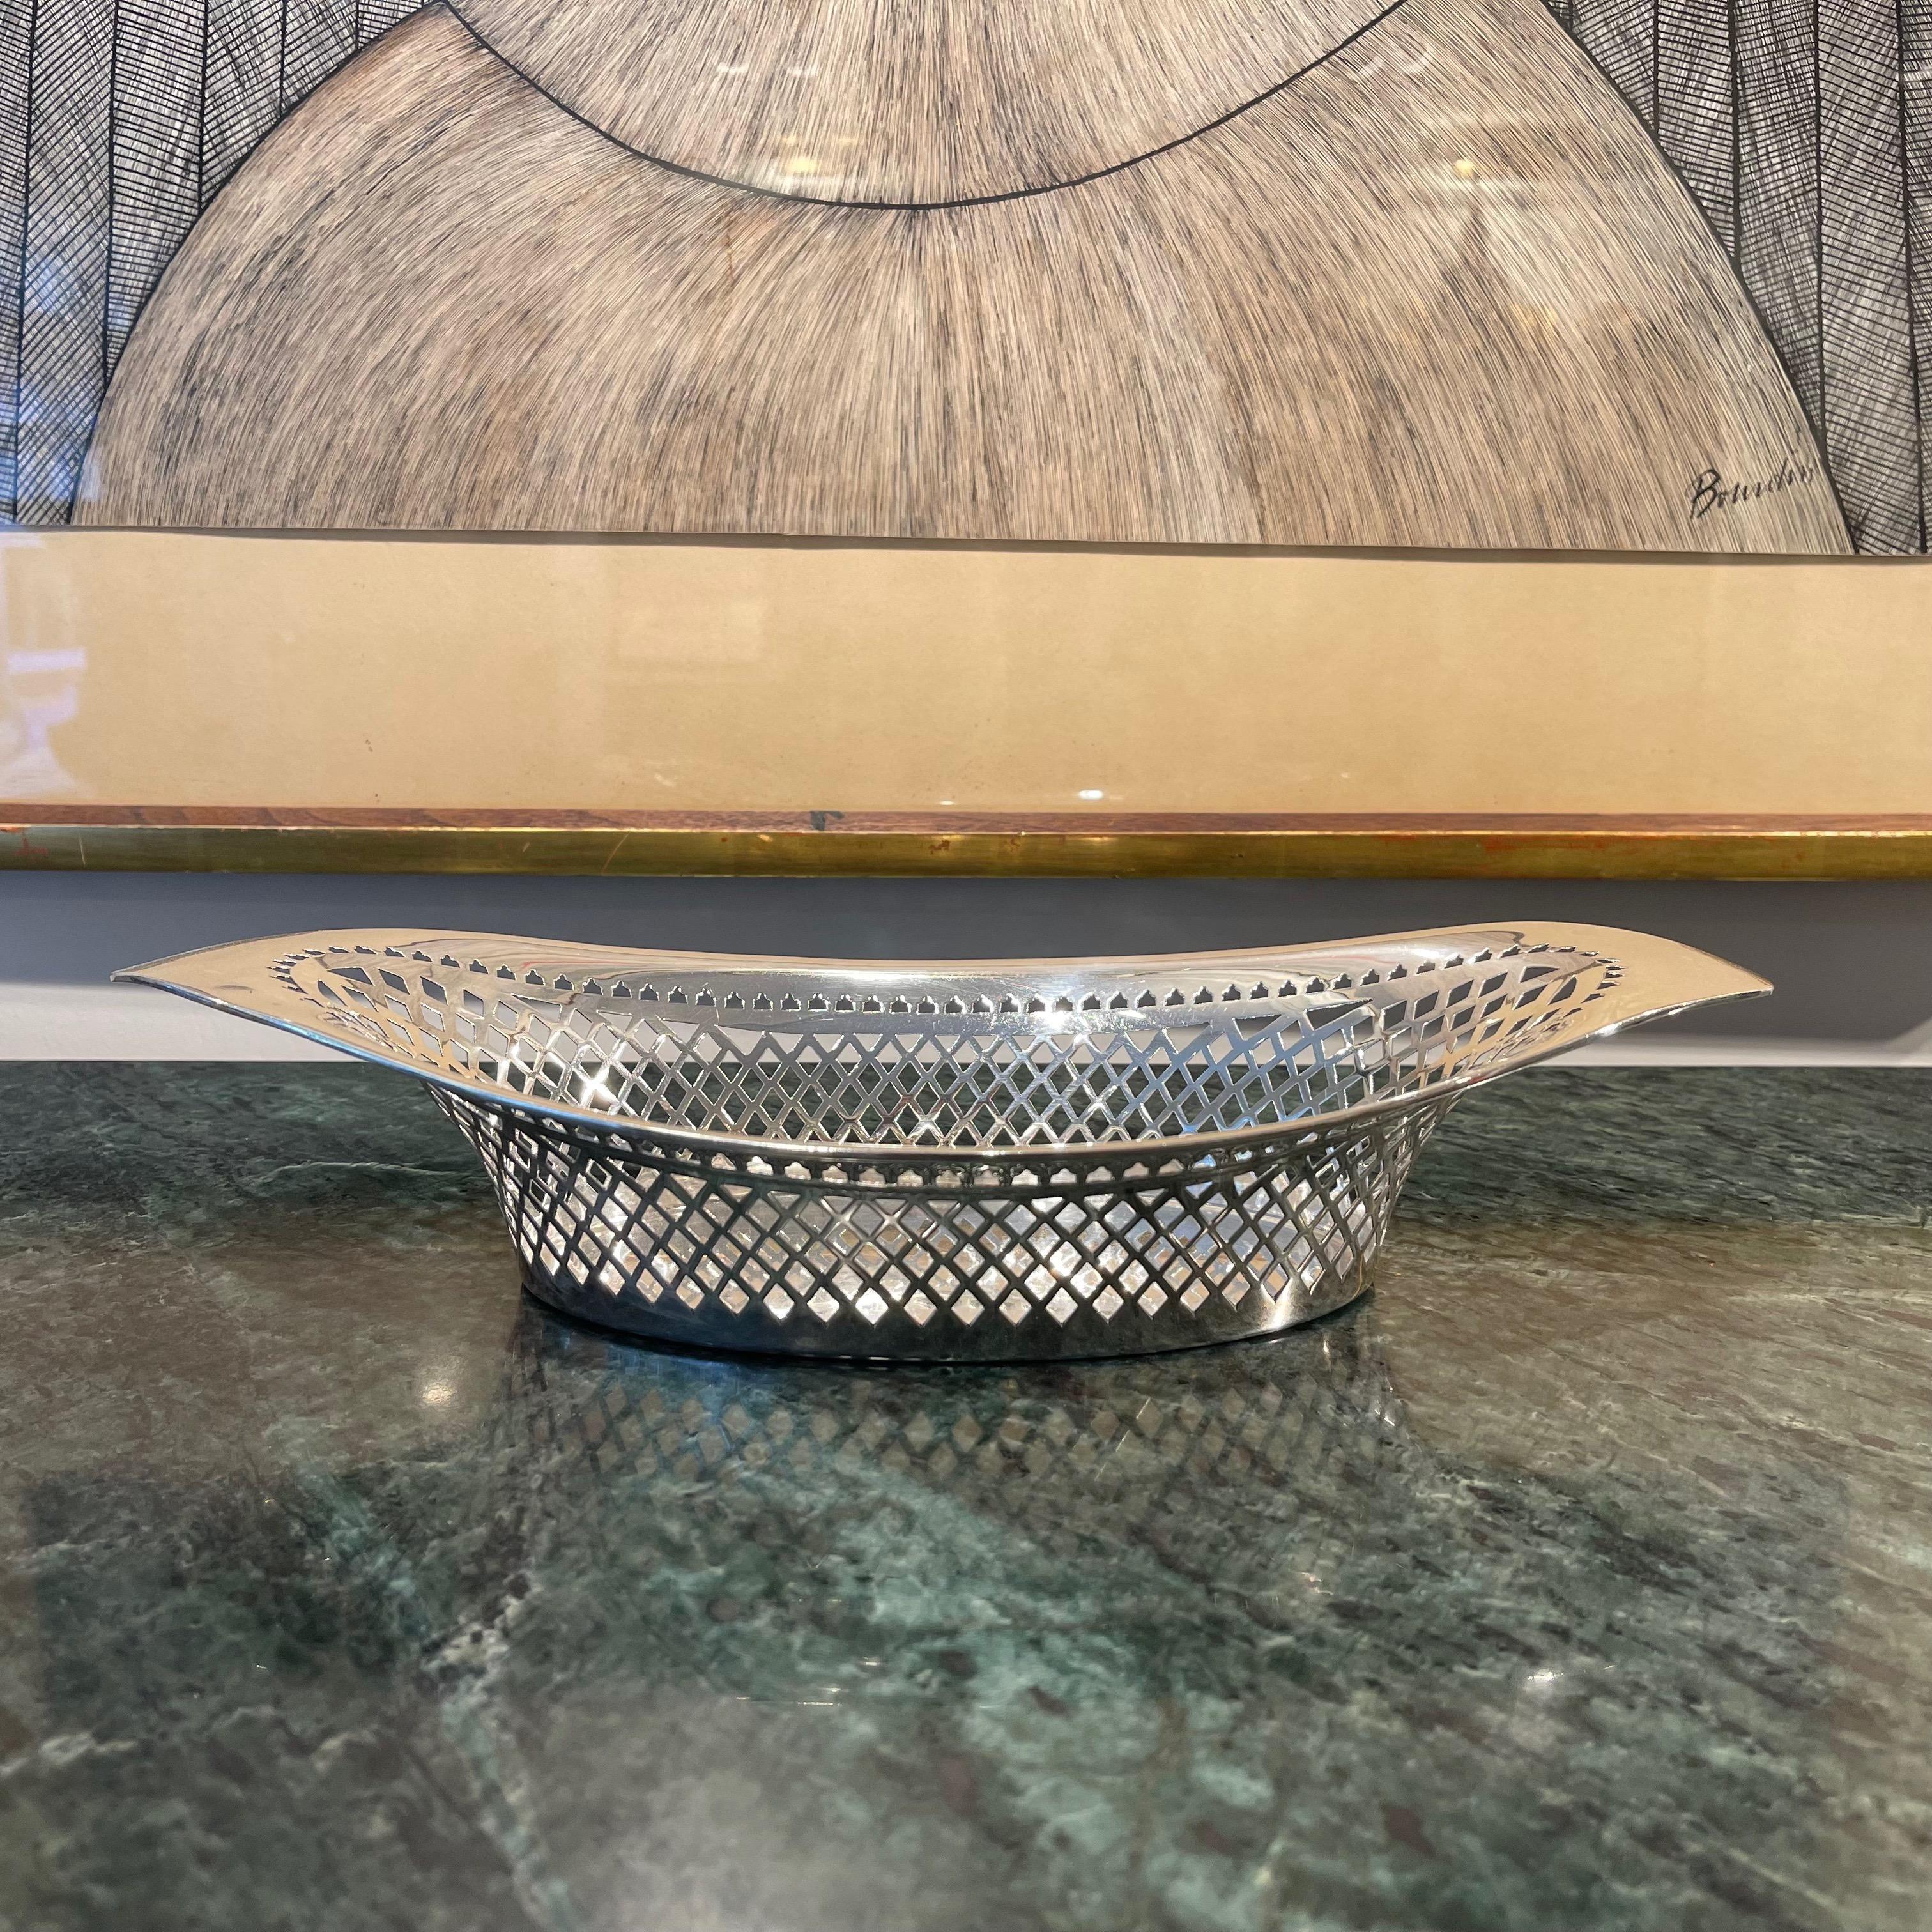 A beautiful geometric grid of diamonds and triangles are cut out symmetrically from the sides of this solid sterling silver Edwardian breadbasket. Above this, a line of small trefoil arches leads into a wide rim bearing the hallmark of the Atkin